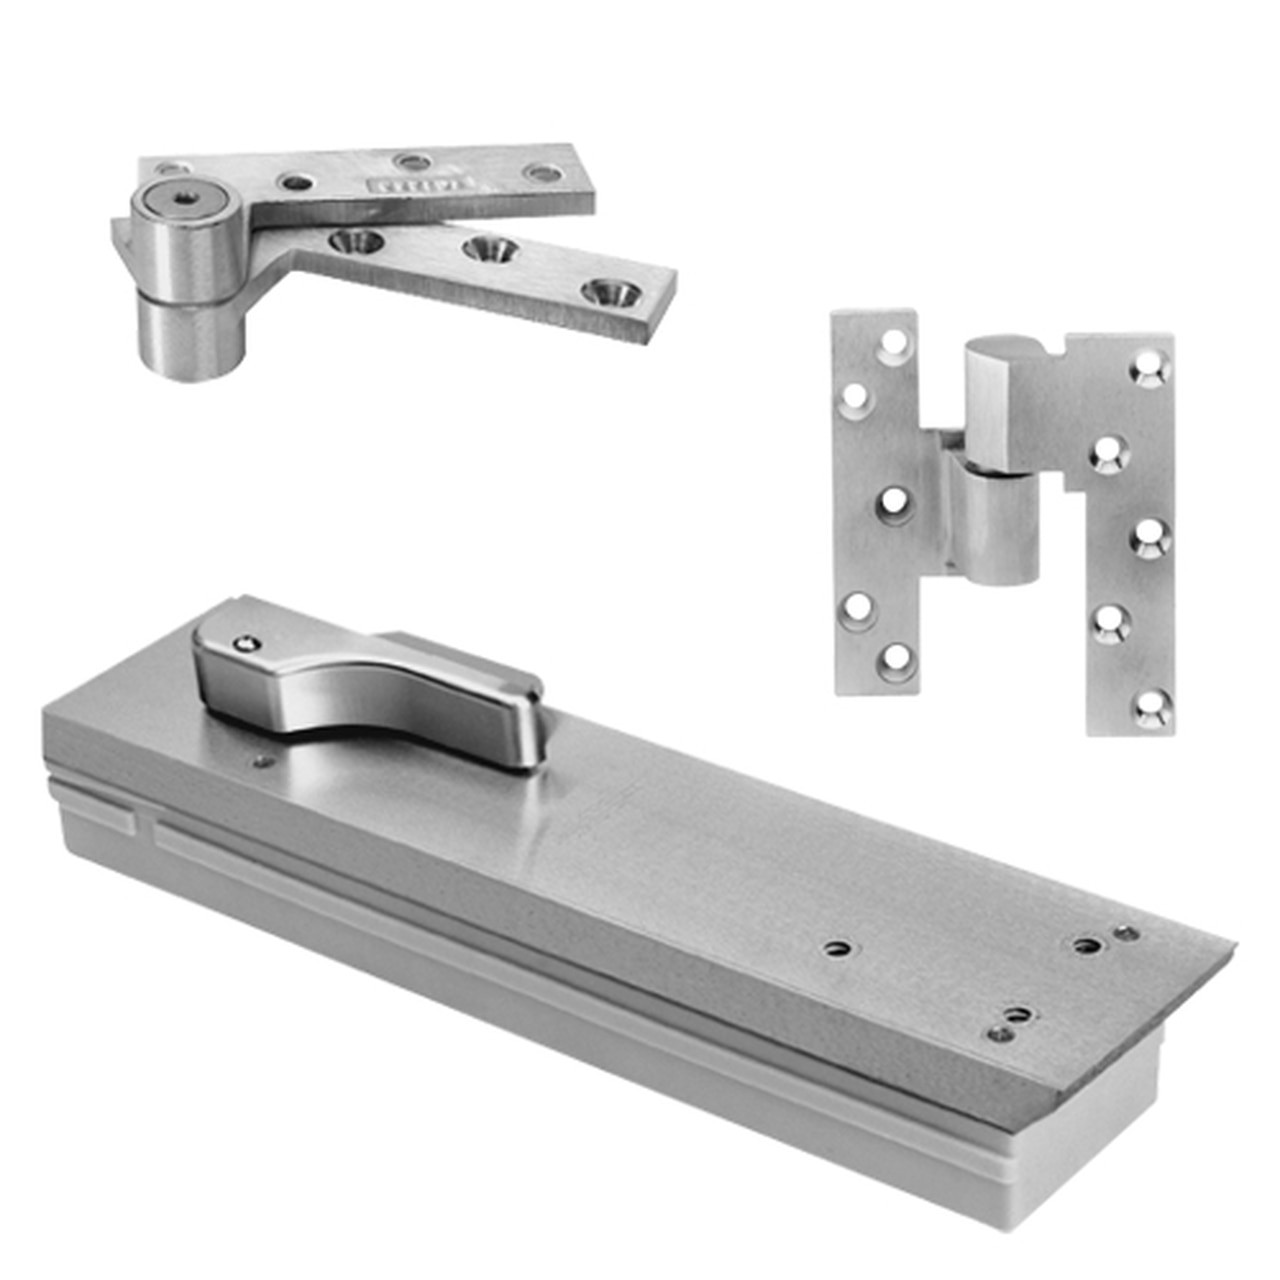 FQ5105NBC-SC-LH-626 Rixson Q51 Series Fire Rated 3/4" Offset Hung Shallow Depth Floor Closers in Satin Chrome Finish